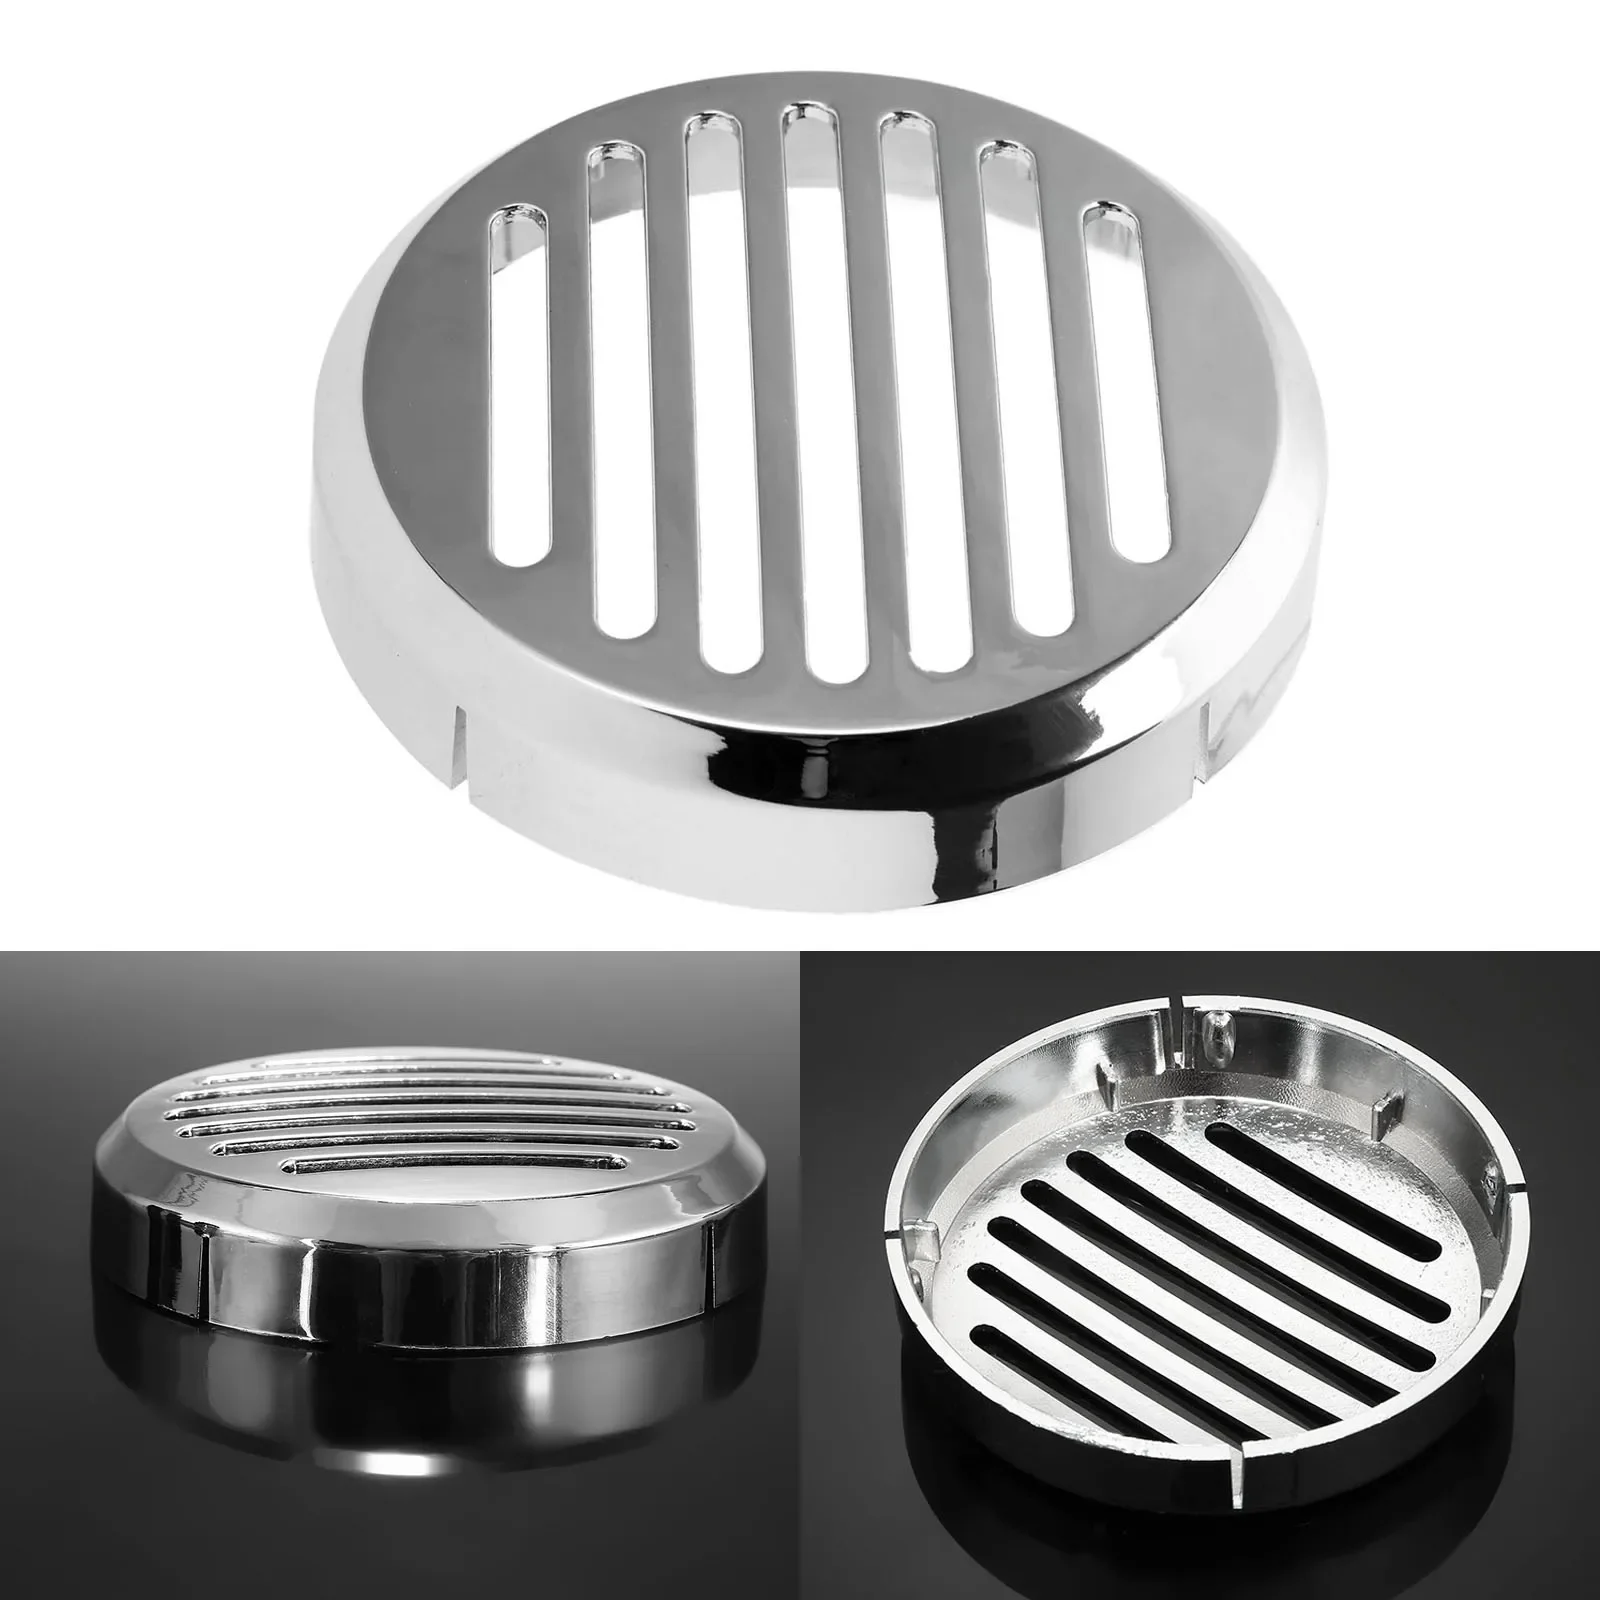 

New Motorcycle 3.5mm Horn Chrome Round Slotted Grille Car Horn Cover Fit For Honda Shadow VT1100 /750/600 VTX1300C1800C VT VF750